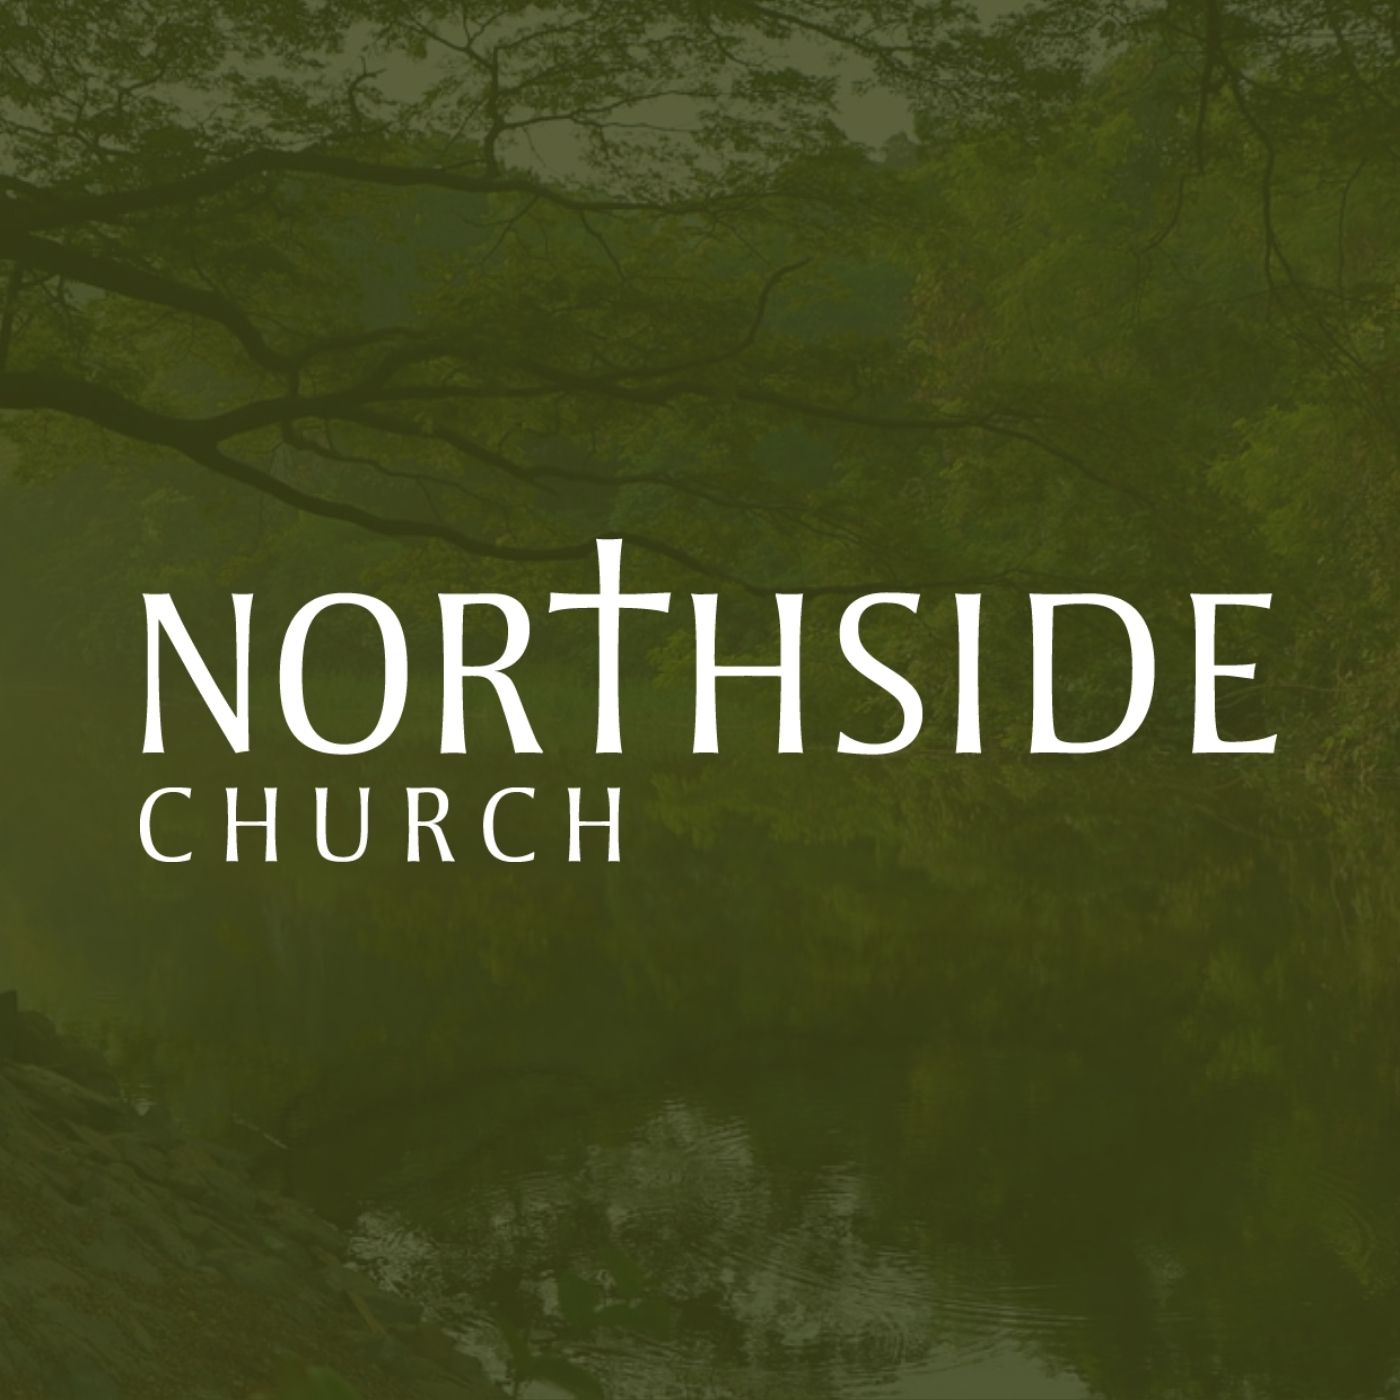 The Northside Church